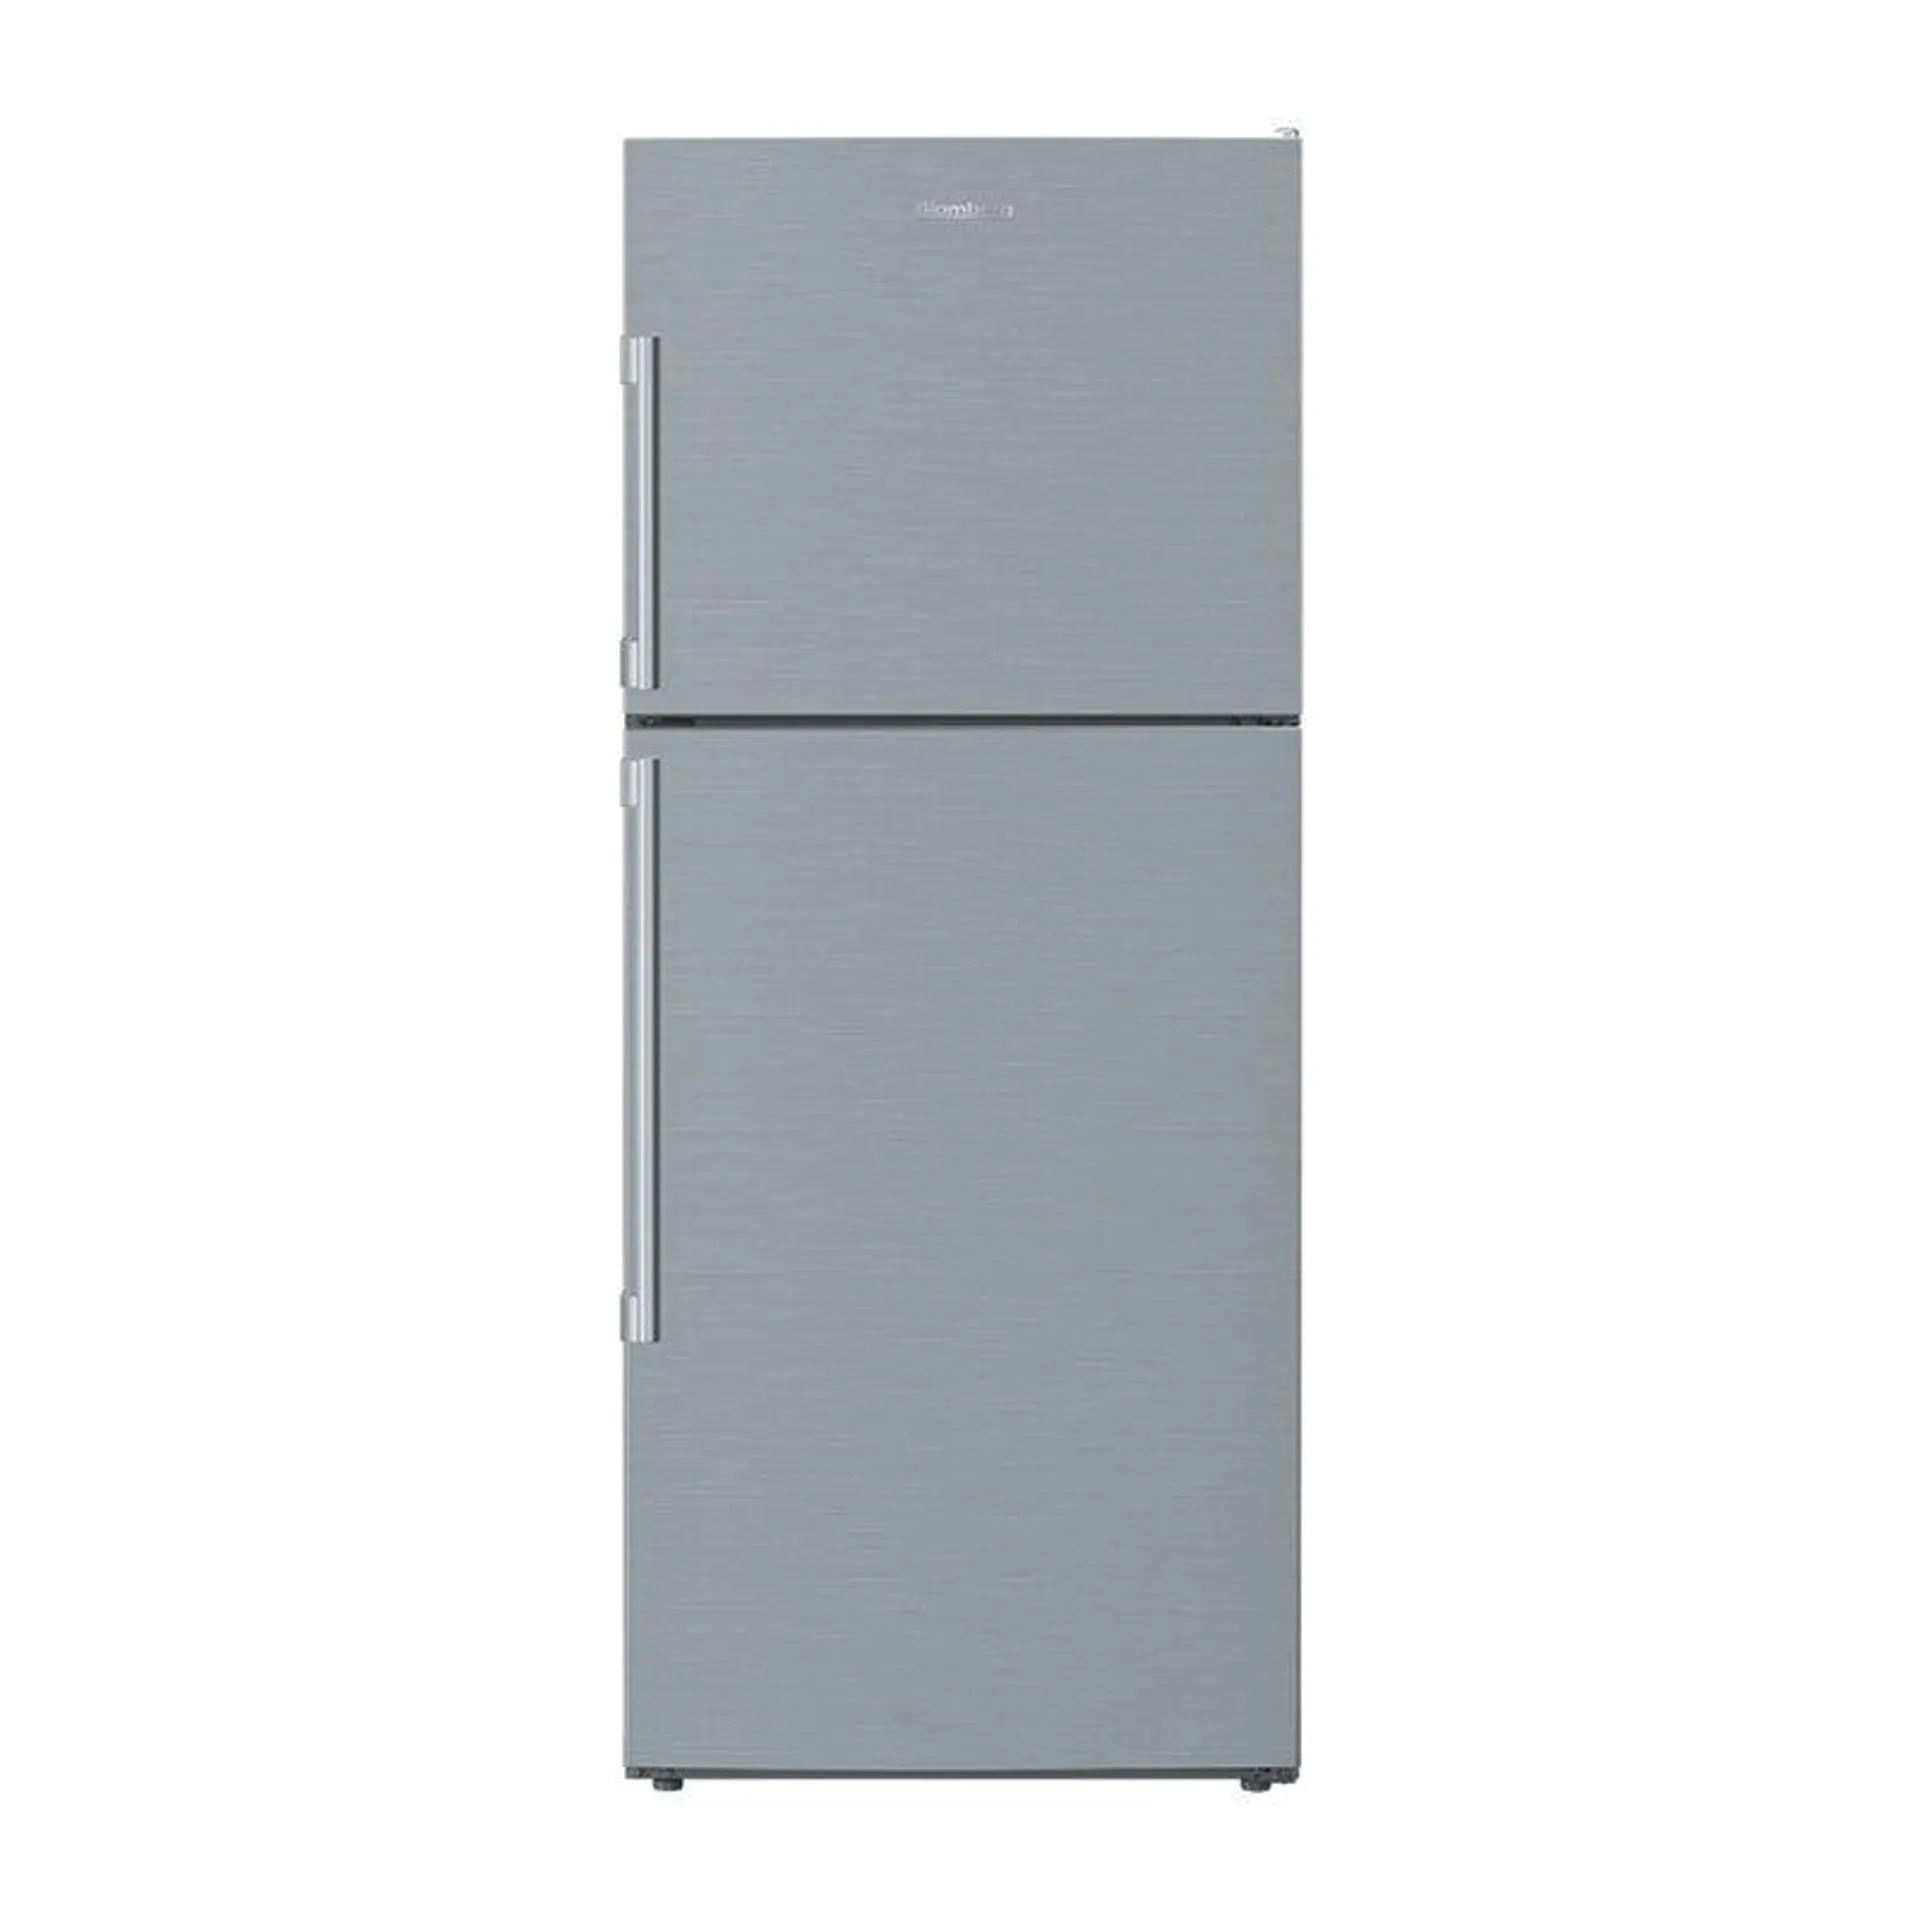 Blomberg 28 in. 13.5 cu. ft. Counter Depth Top Freezer Refrigerator with Ice Maker - Stainless Steel